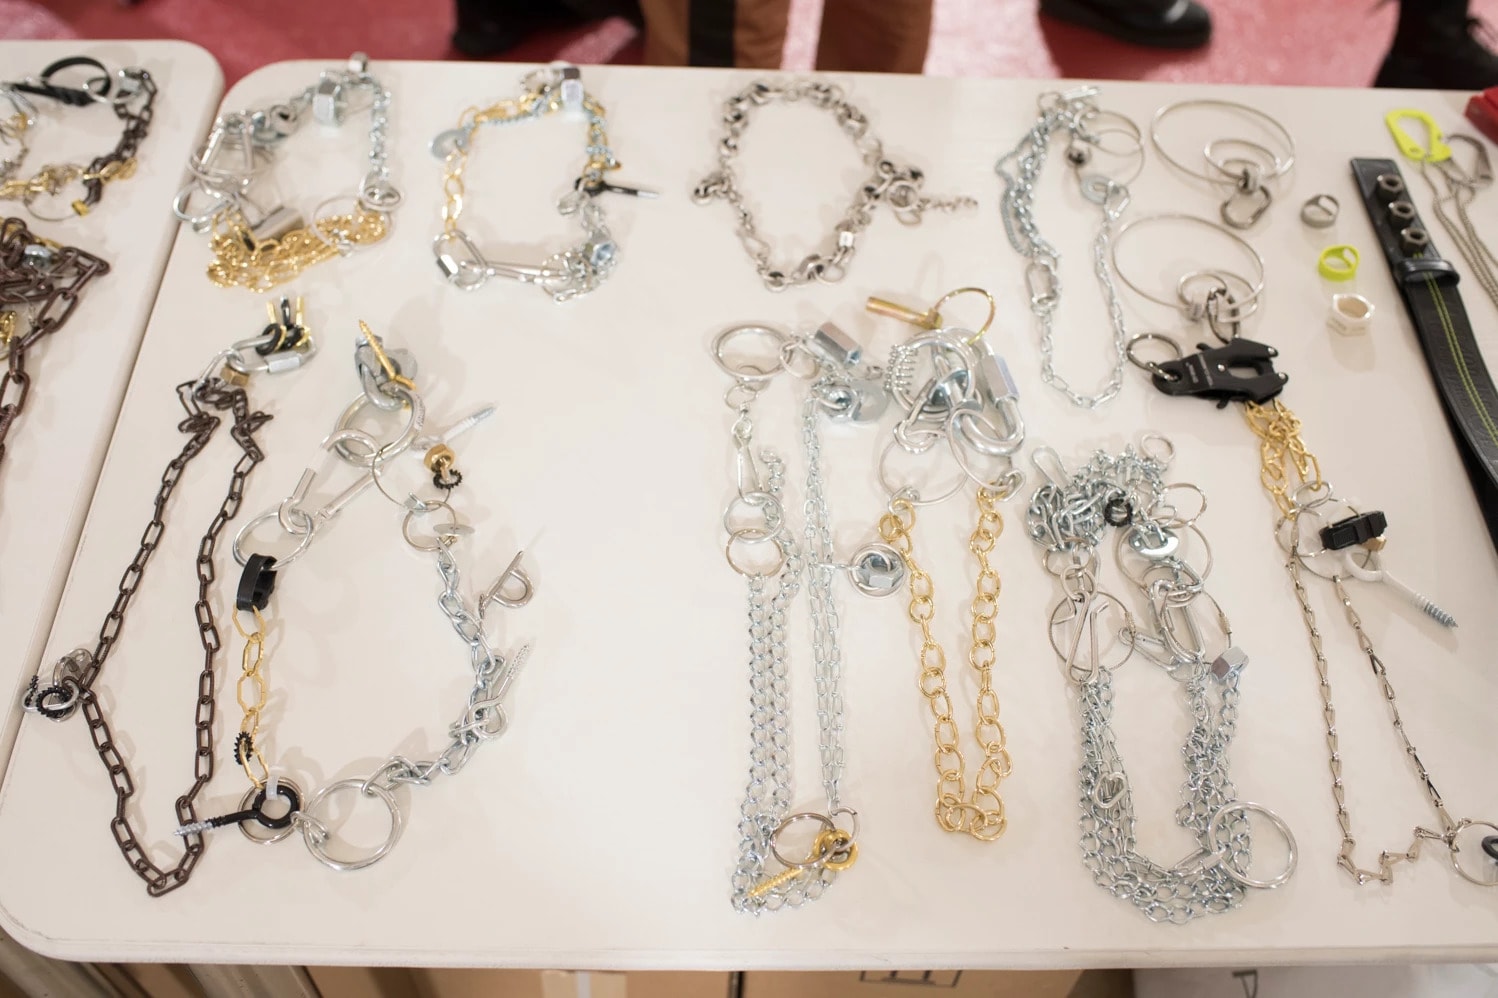 Off-White Virgil Abloh Menswear Spring/Summer 2019 Paris Fashion Week Men's Collection Backstage Chains Necklaces Silver Gold